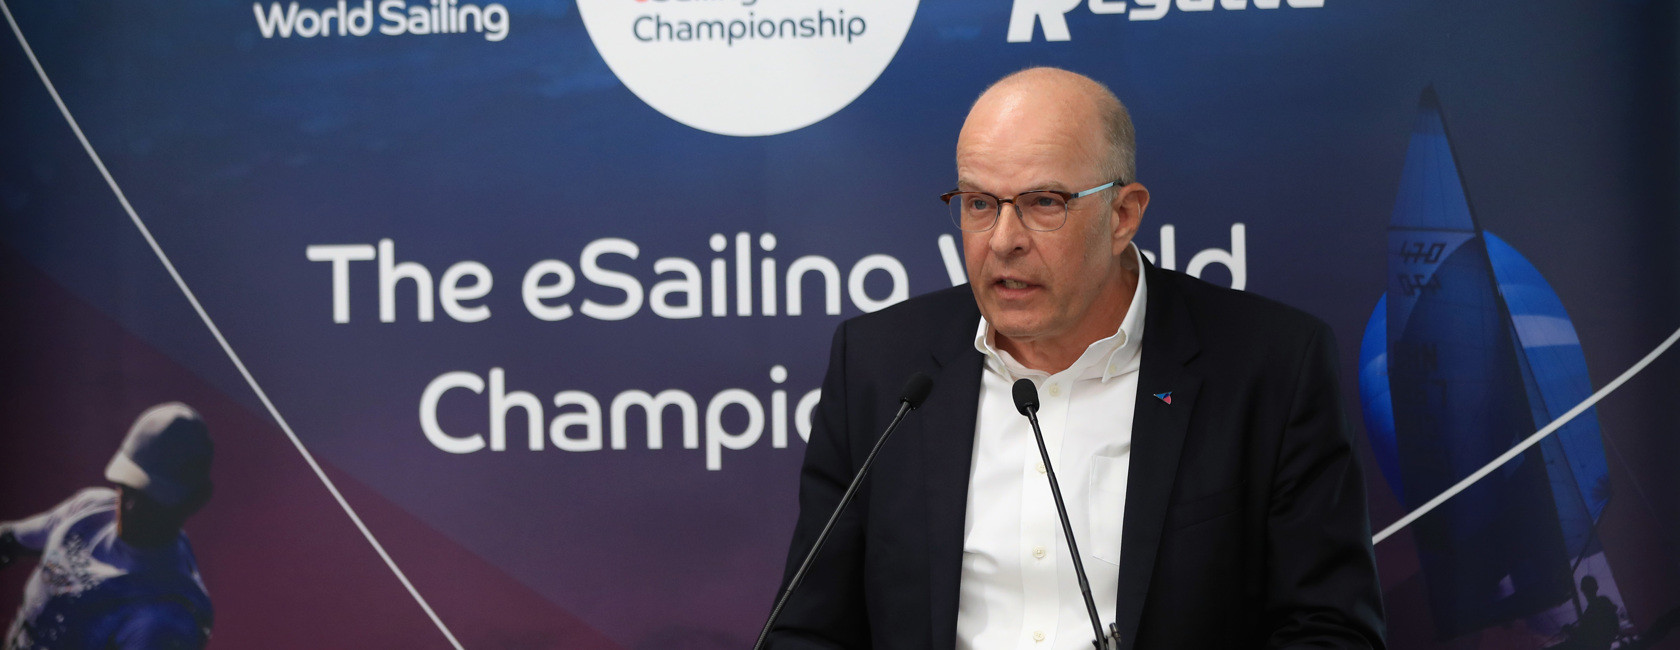 Denmark's Kim Andersen had filed a complaint against World Sailing Ethics Commission chairman Dieter Neupert and member Ng Ser Miang a month before he was ousted as the International Federation's President ©World Sailing